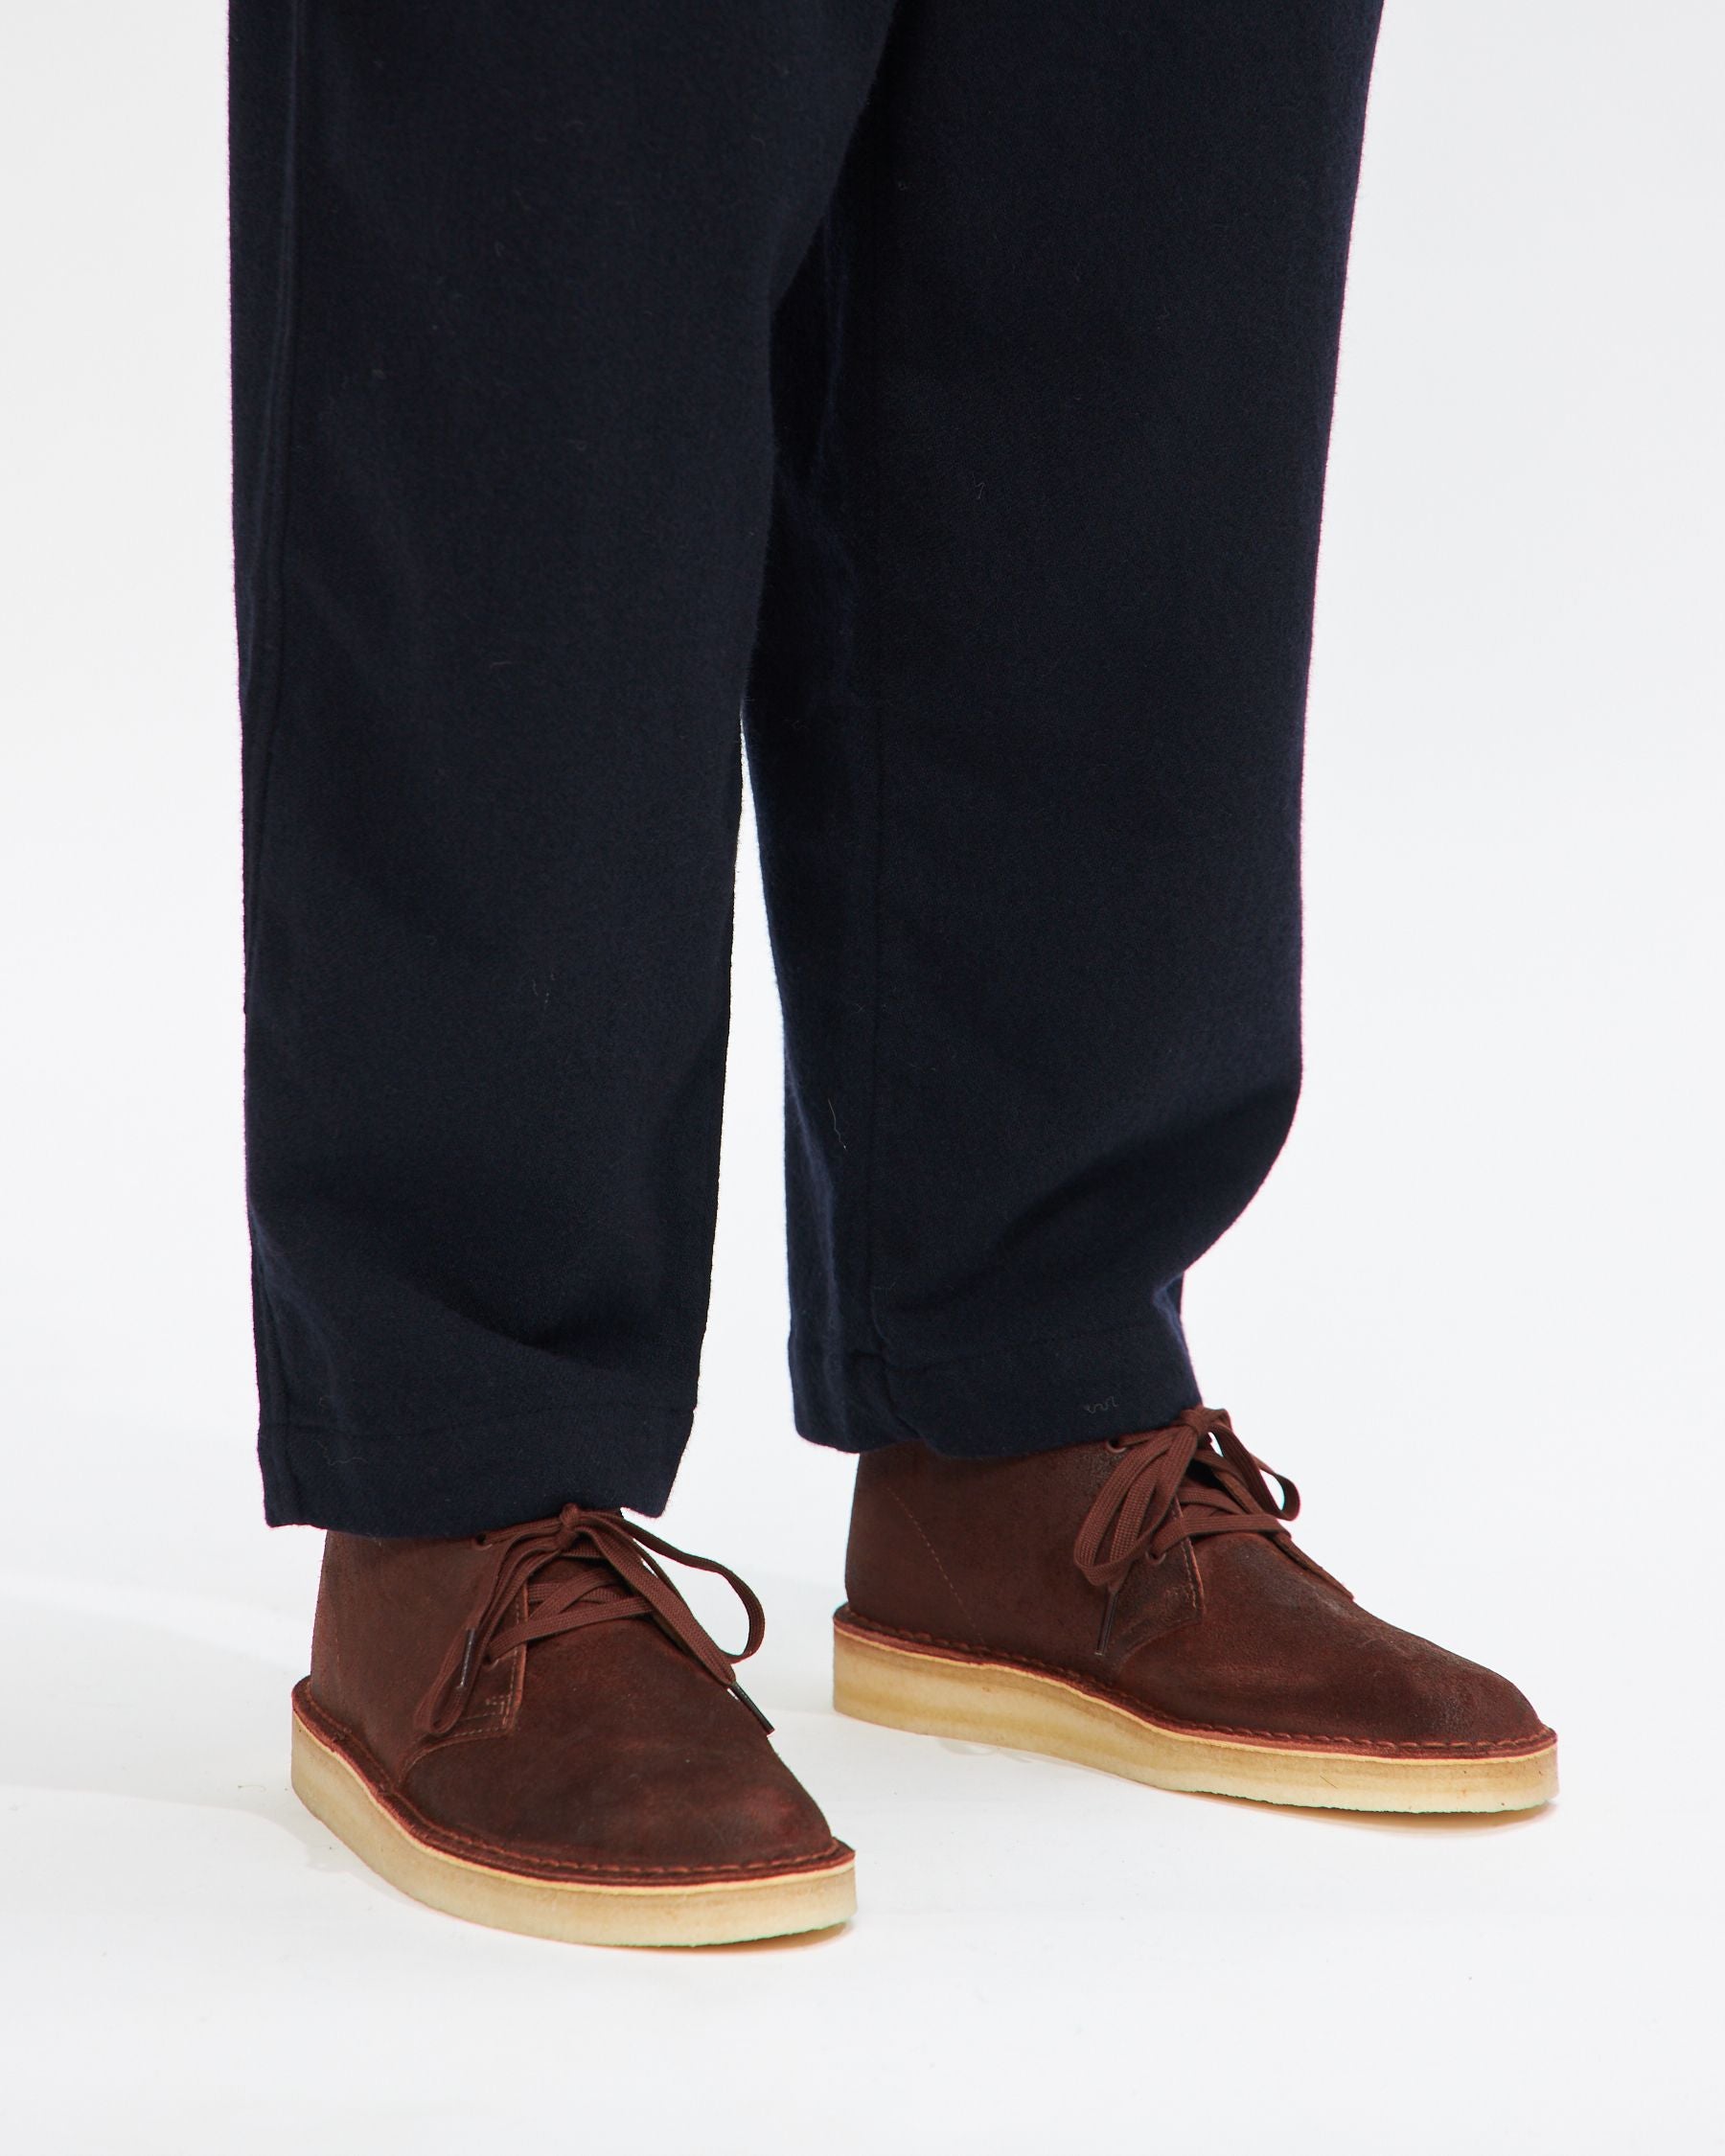 Oxford Pant in Navy Recycled Soft Wool